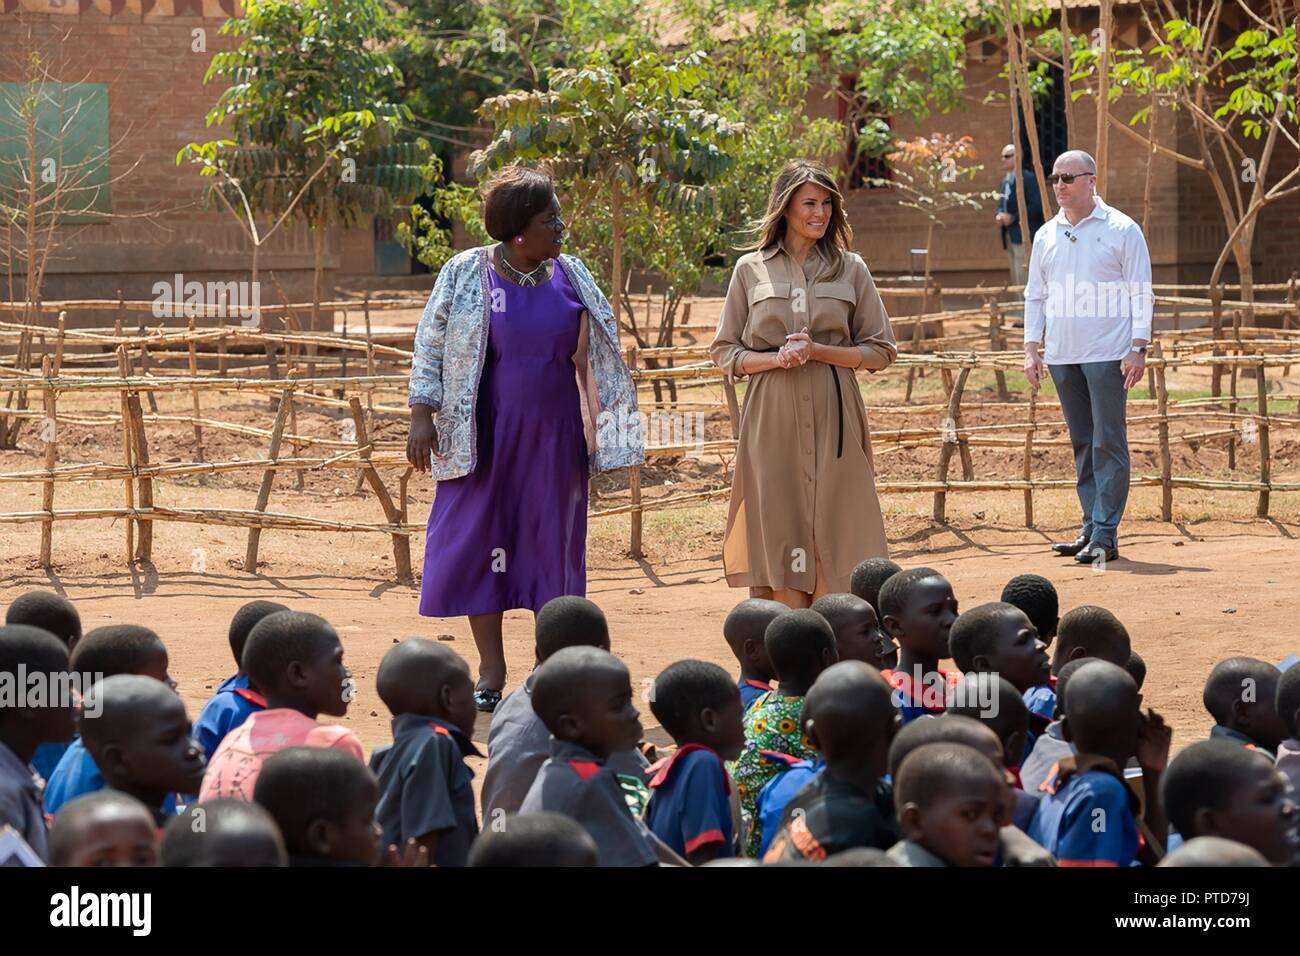 U.S First Lady Melania Trump and Headmistress Maureen Masi watch an outdoor classroom learning the English and Chichewa languages at the Chipala Primary School October 4, 2018 in Lilongwe, Malawi. This is the first solo international trip by the First Lady. Stock Photo